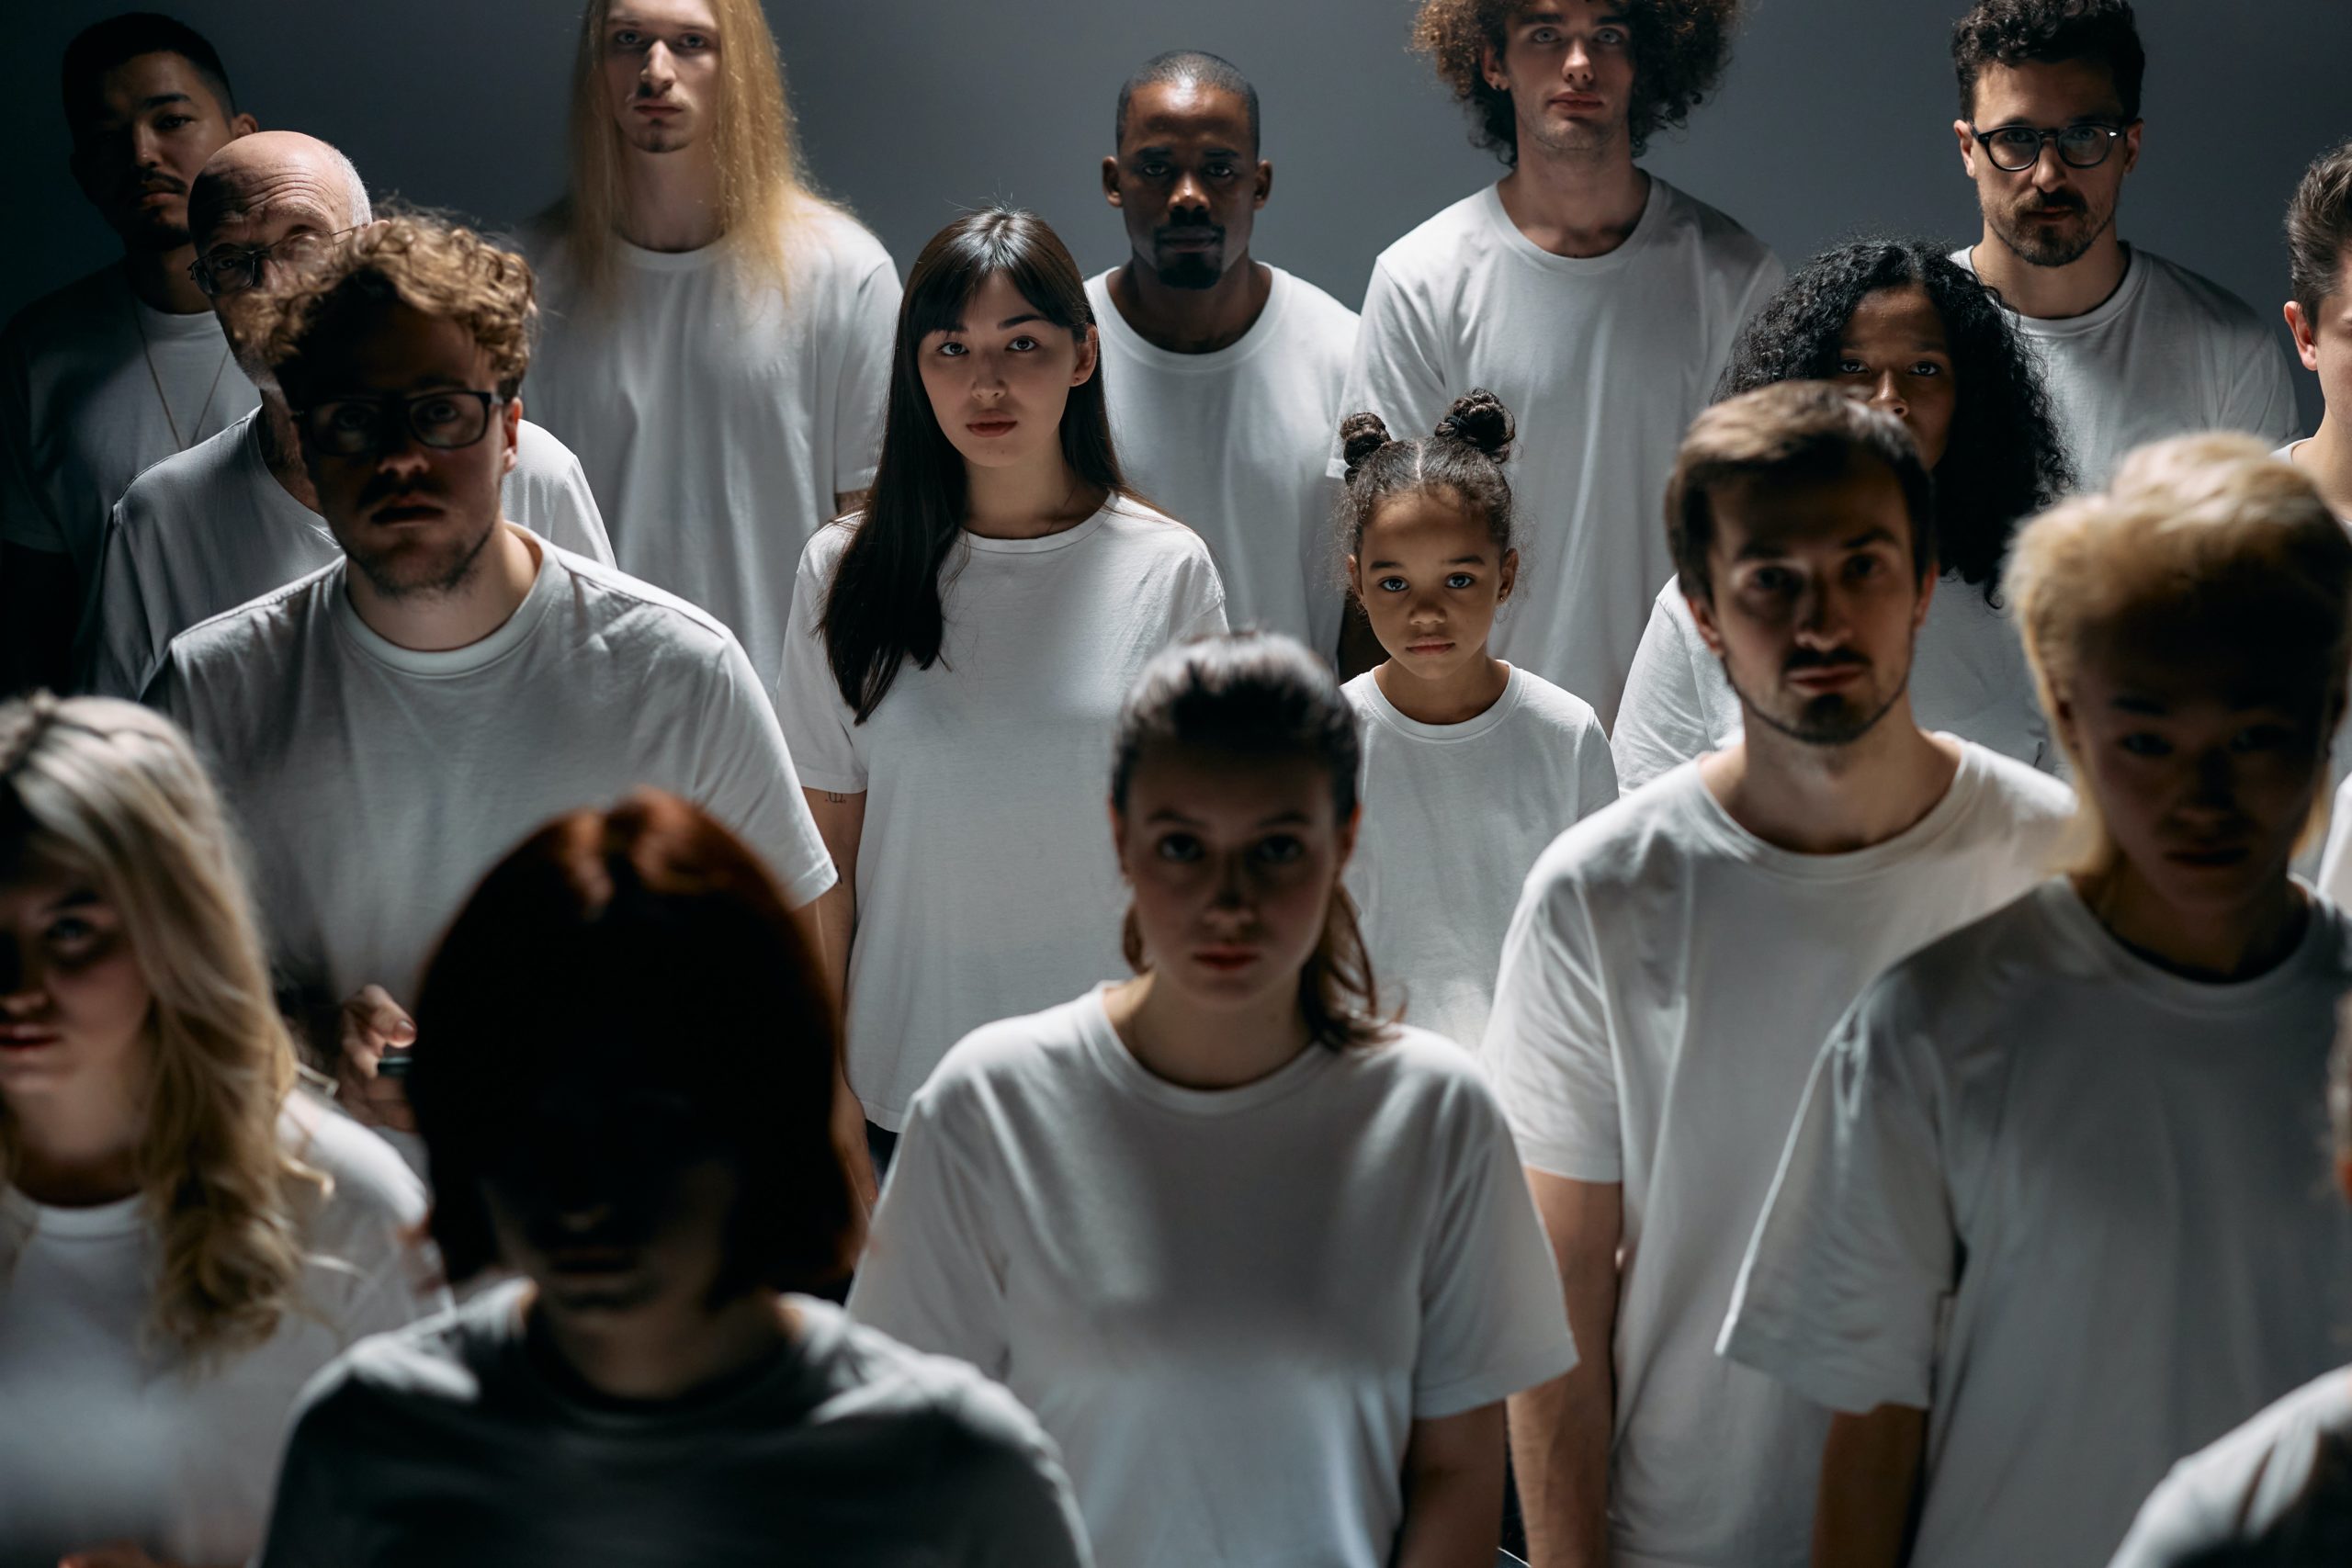 A group of people of different genders and races stand slightly apart in white t-shirts, facing the camera with blank expressions.